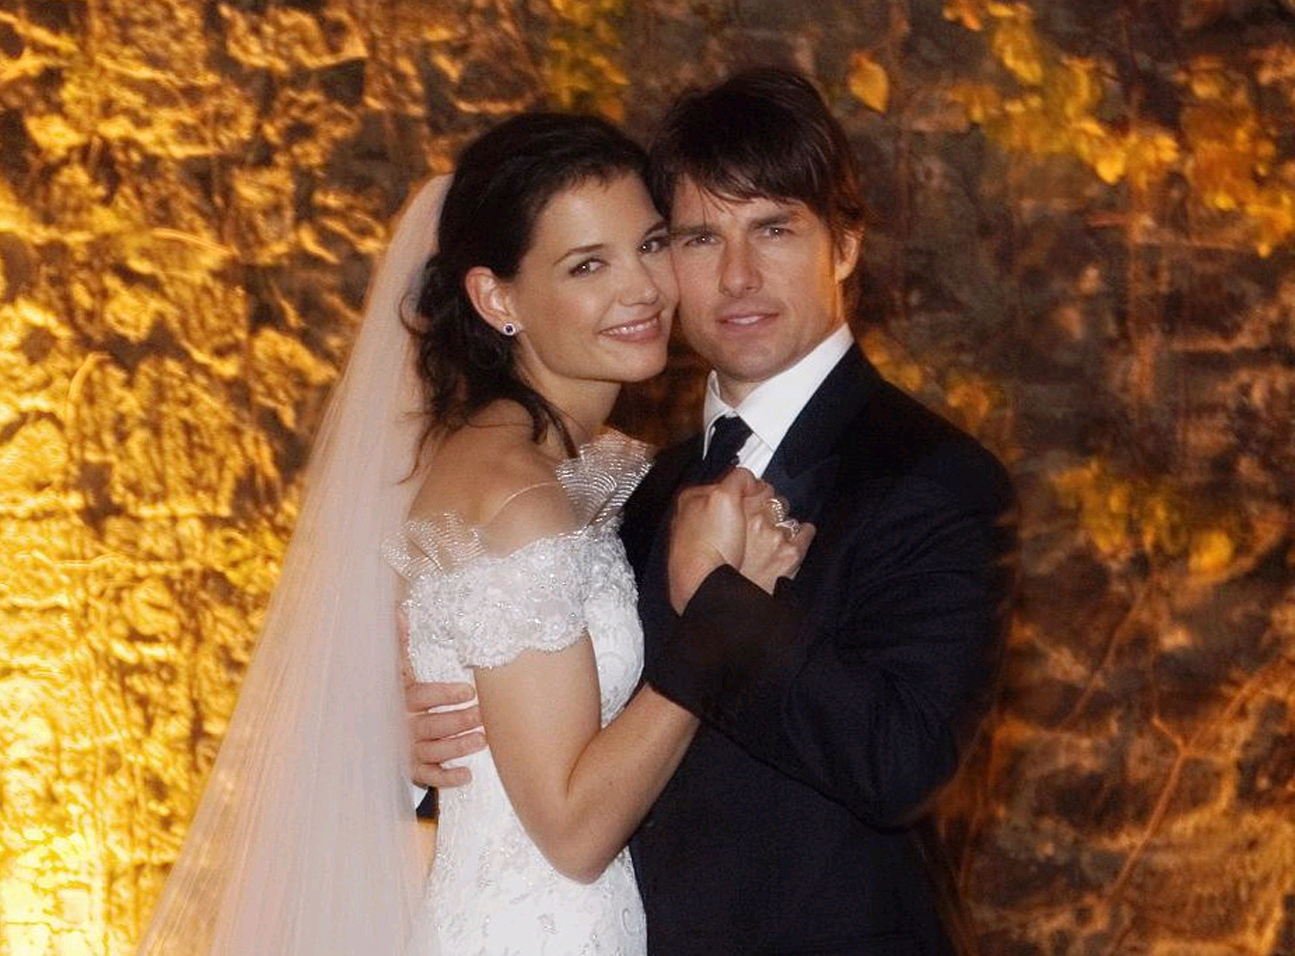 Tom Cruise and Katie Holmes in Rome, Italy in 2006 | Source: Getty Images 